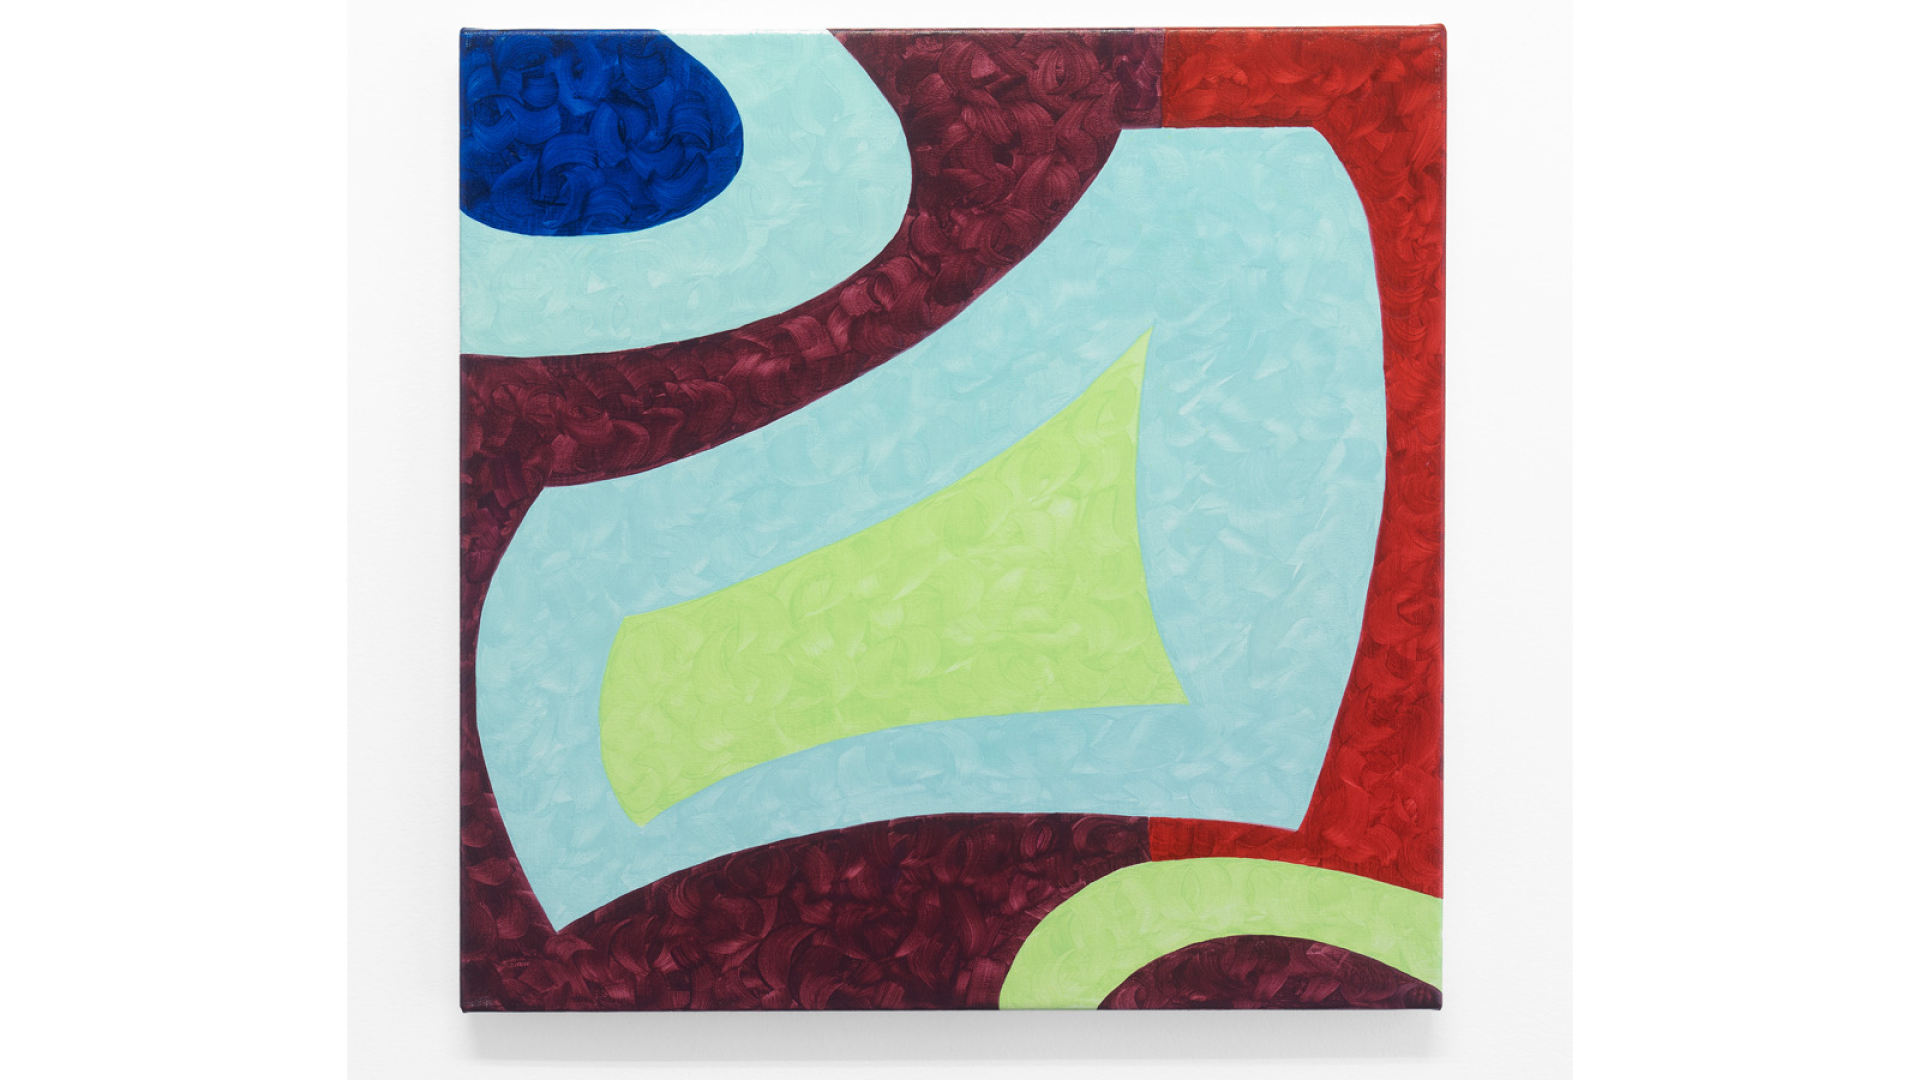 I square oil painting made up of dynamic hard edged and circular shapes in various tones of red, green and blue, built up from small texural brush strokes.